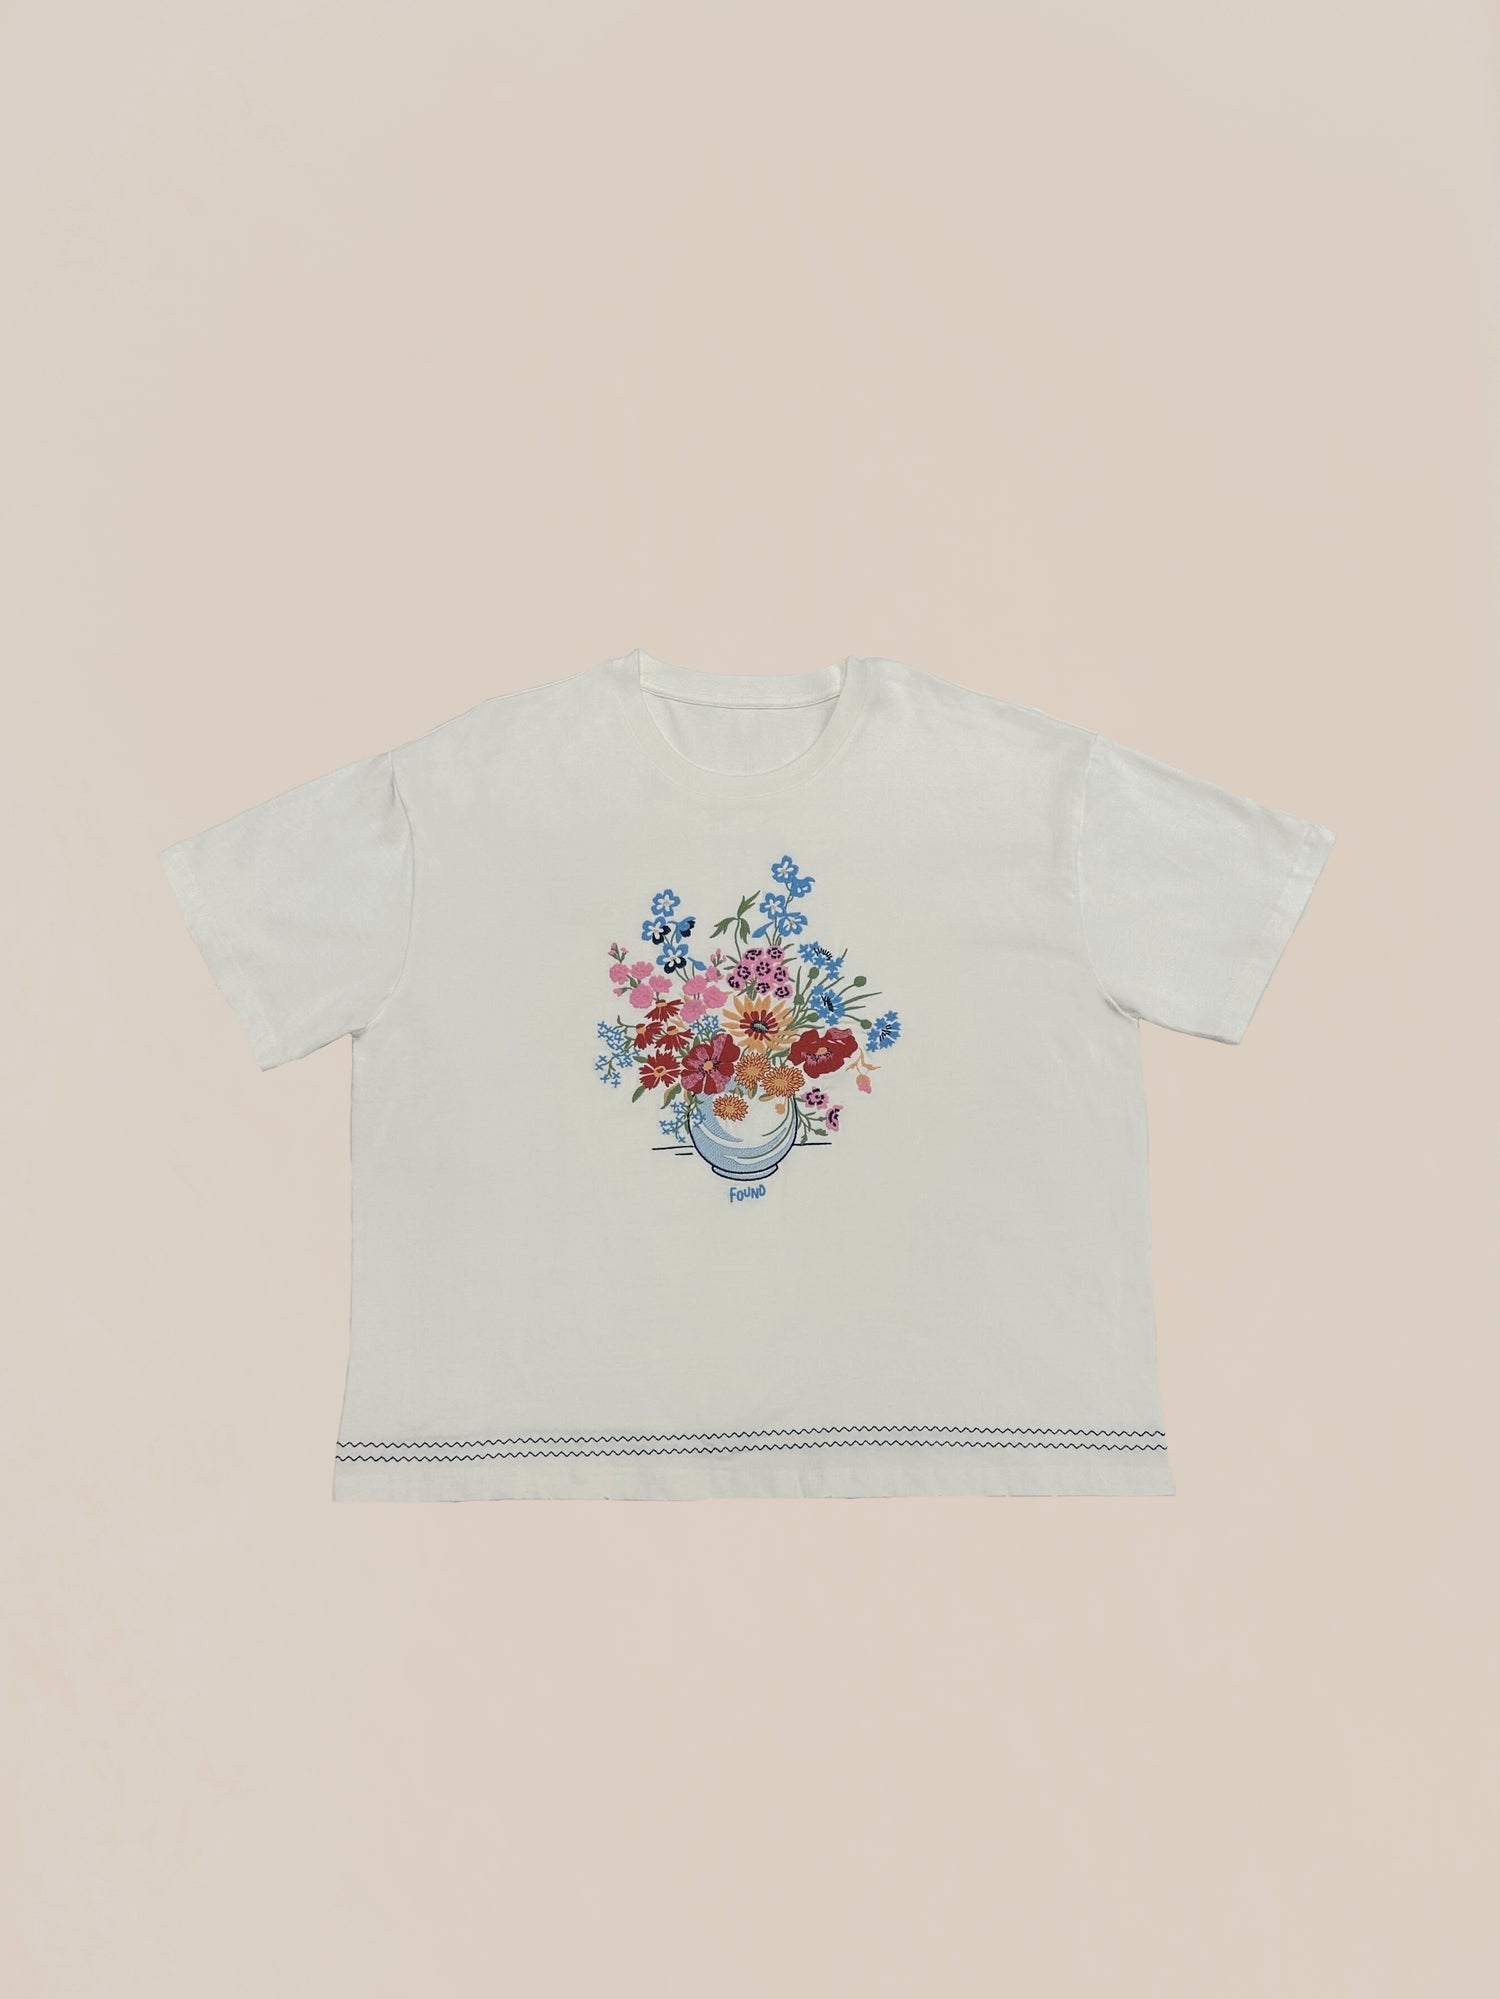 100% Cotton white t-shirt with Profound's Sample 79 (Bouquet Flowers Tee) design centered on the front against a pale pink background.